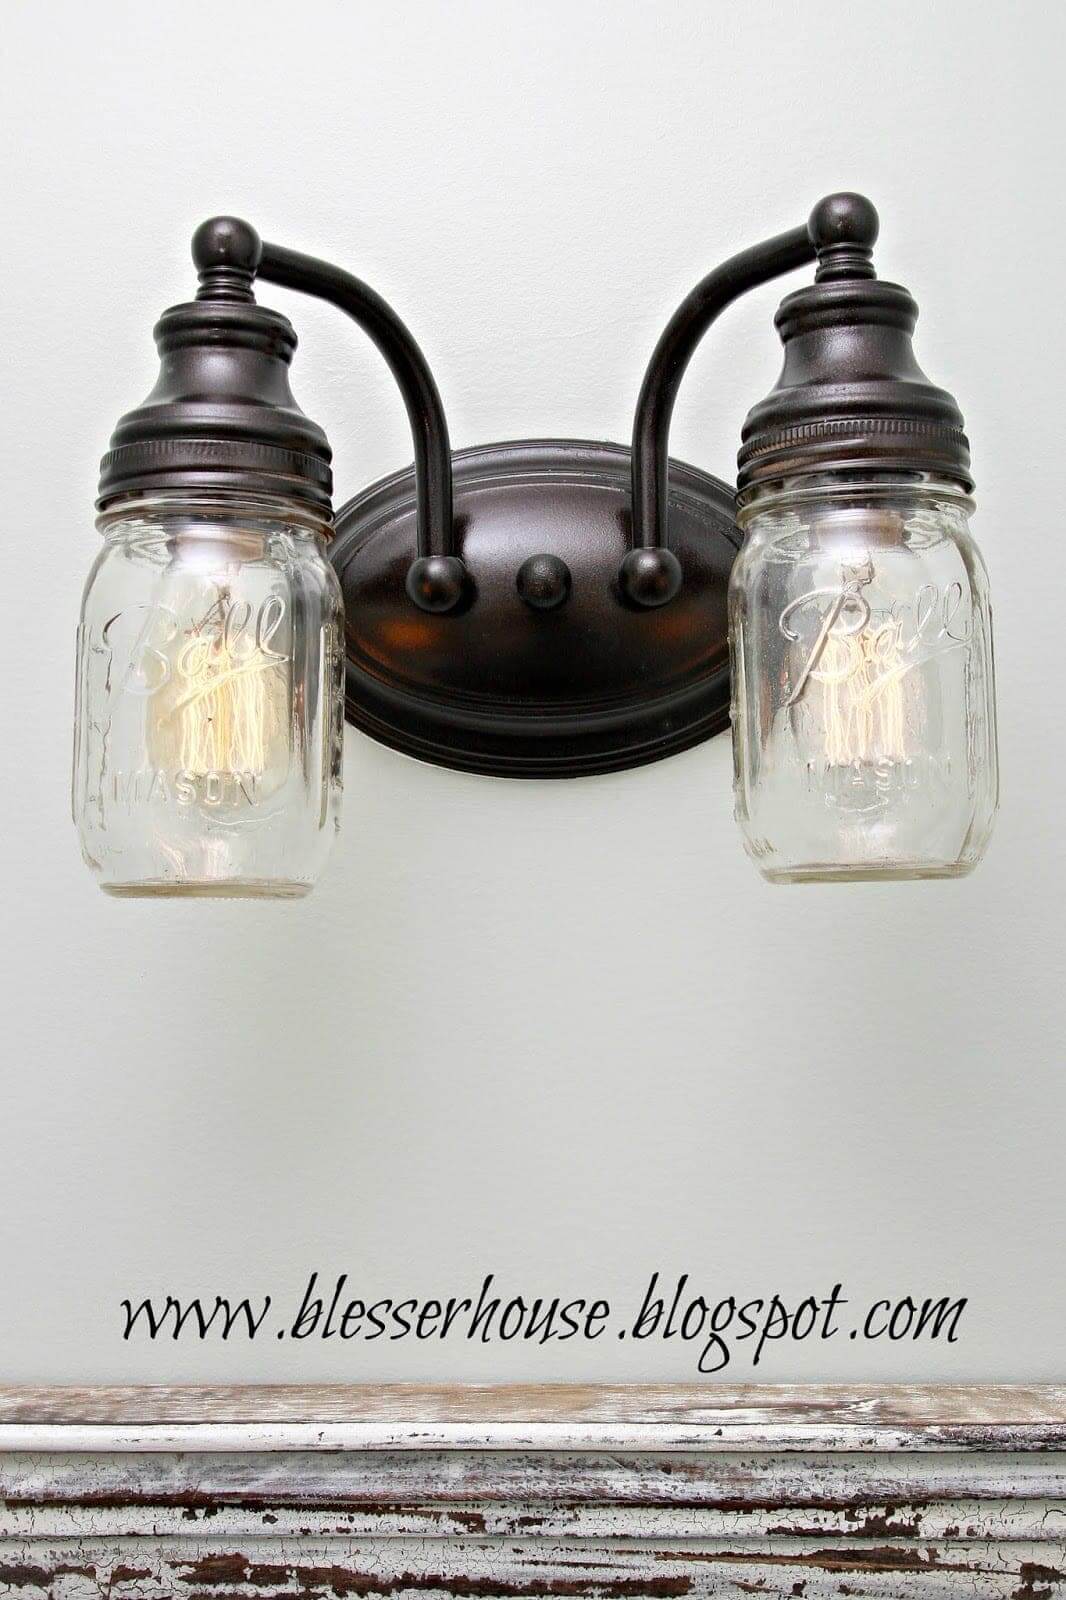 In Creating A Vintage Mason Jar Ceiling Light, this is a mason jar light created by the bloggers at Blesser House